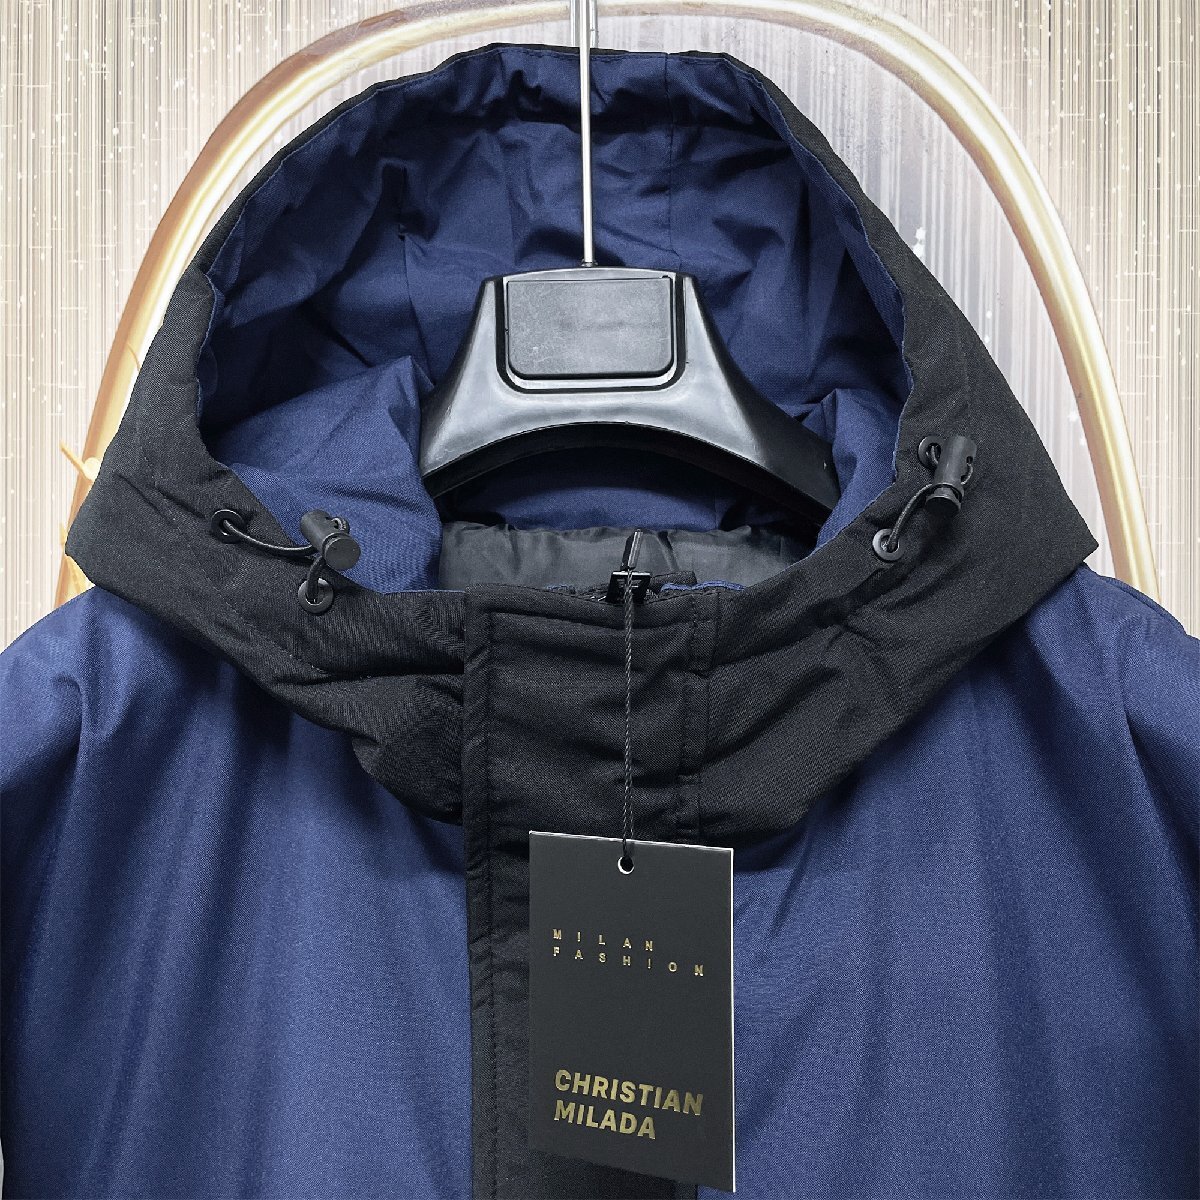  regular price 8 ten thousand *christian milada* milano departure * down jacket * Duck down 90% thick protection against cold . manner piece . with a hood . dressing up autumn winter 2XL/52 size 